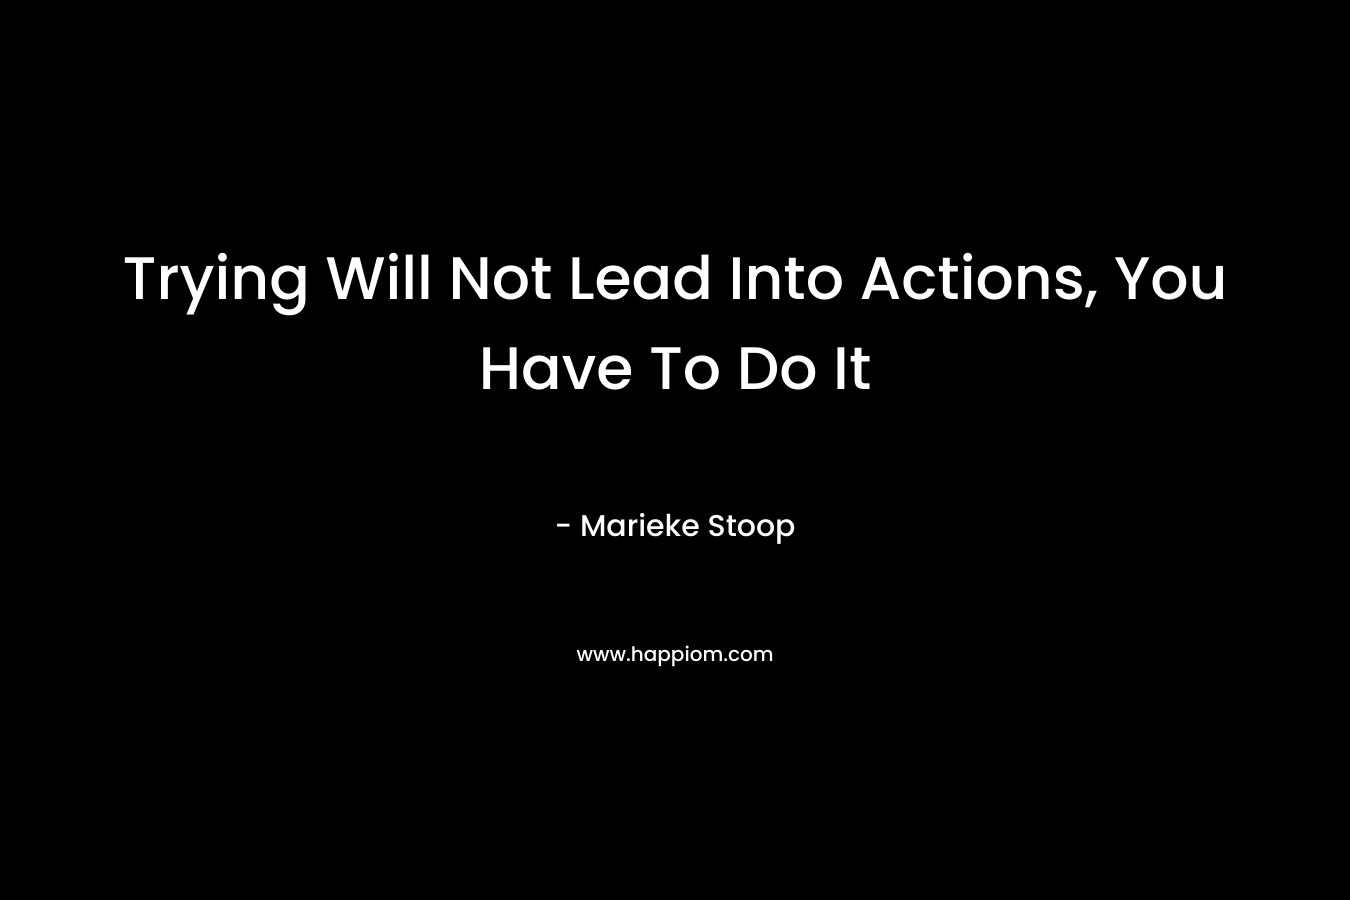 Trying Will Not Lead Into Actions, You Have To Do It